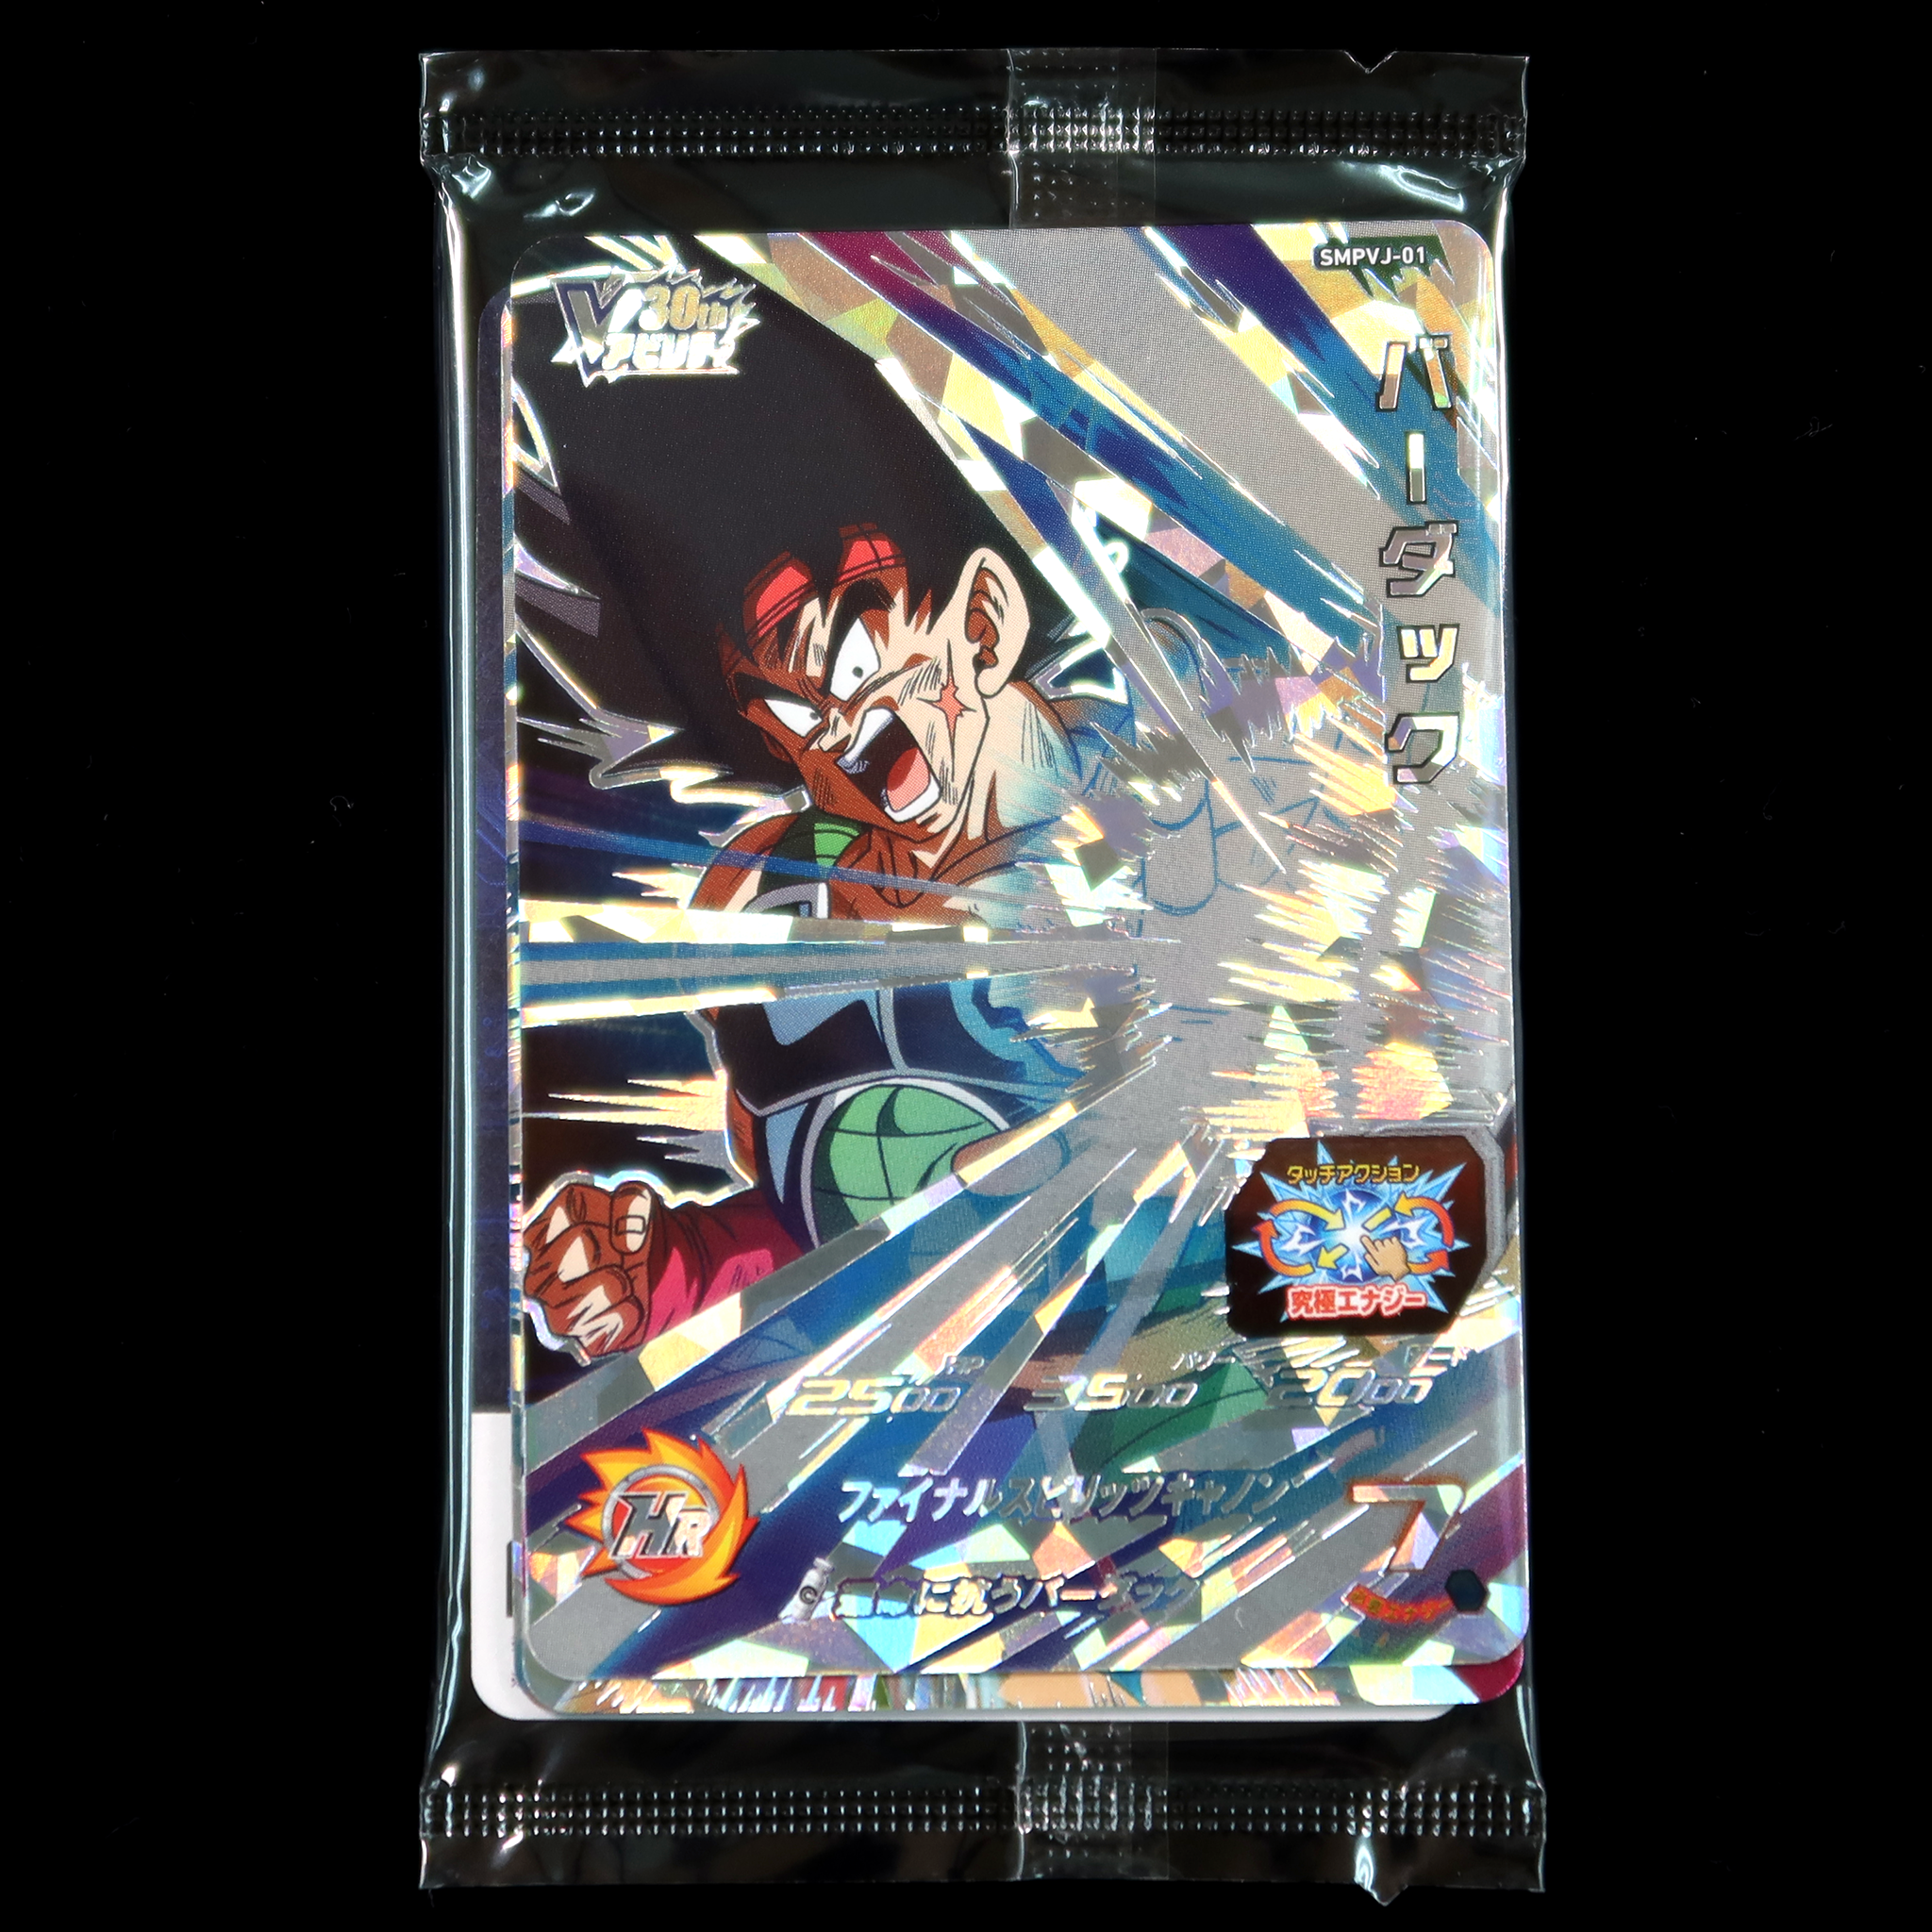 SUPER DRAGON BALL HEROES Victory Premium Pack SMPVJ-01 / 02 / 03 in blister